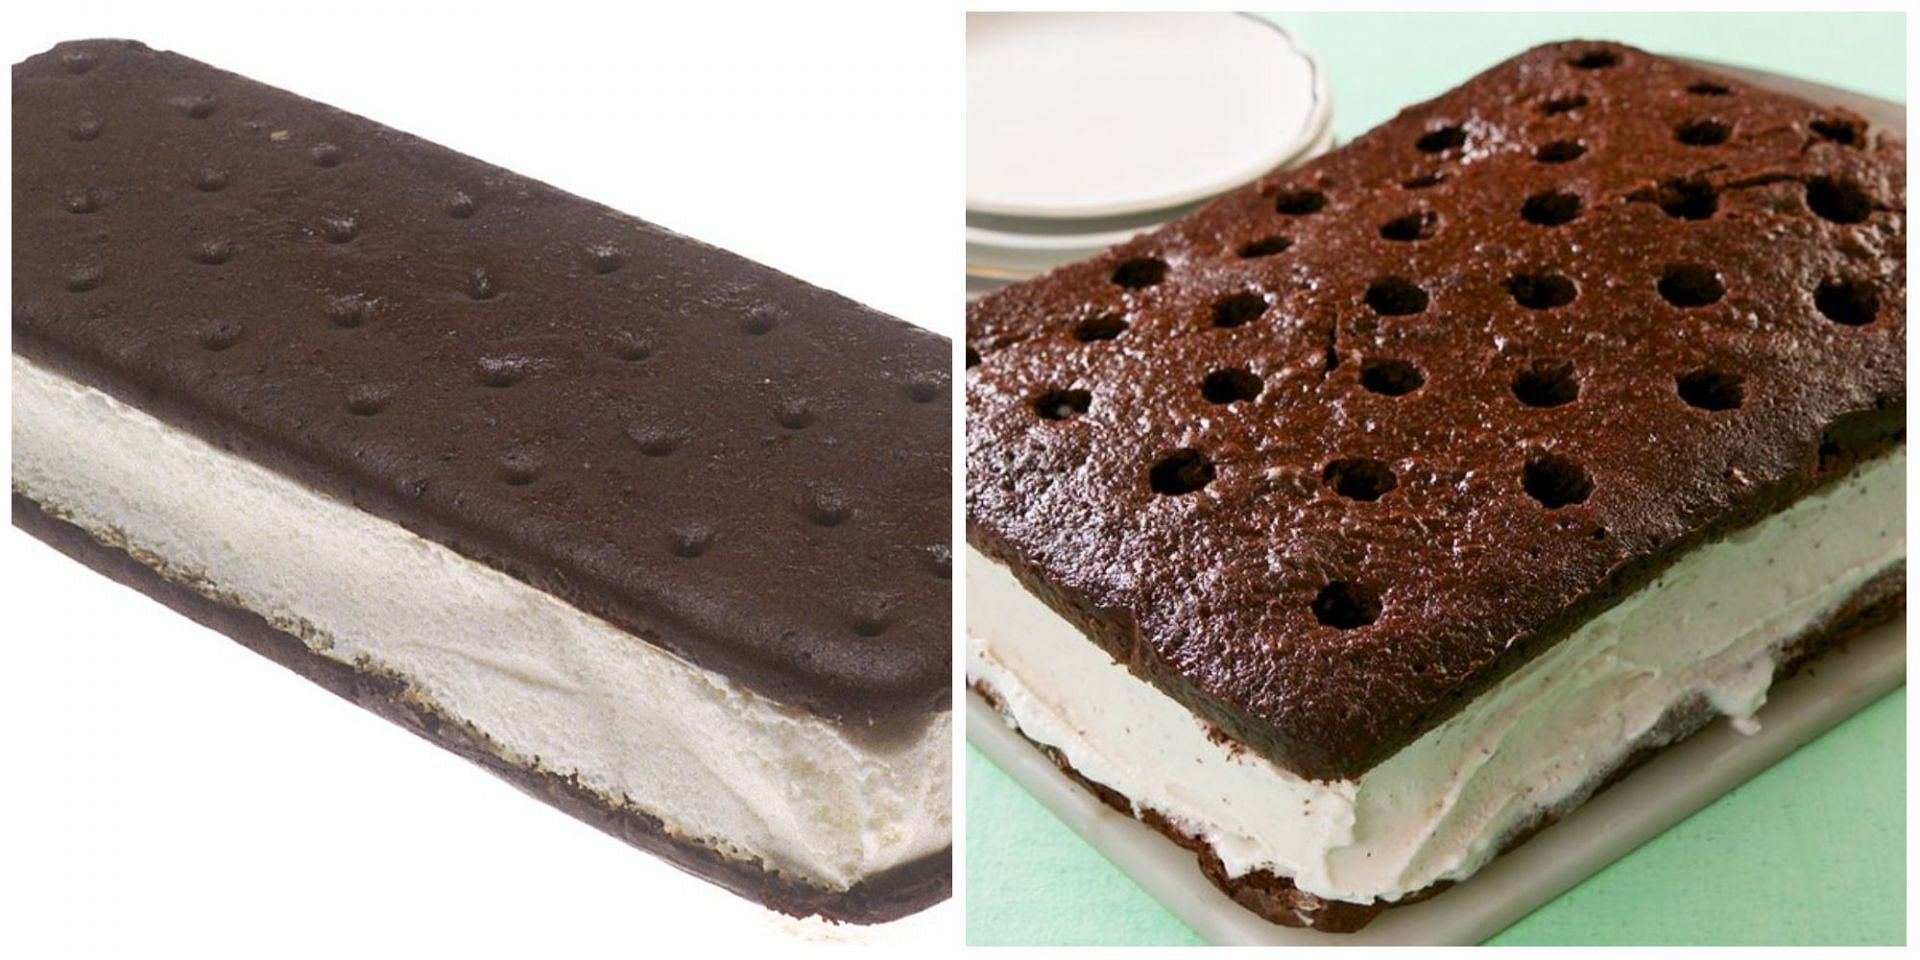 National Ice Cream Sandwich Day is here! Know the significance and history of the dessert. (Image via Wikipedia &amp; Delish.com)